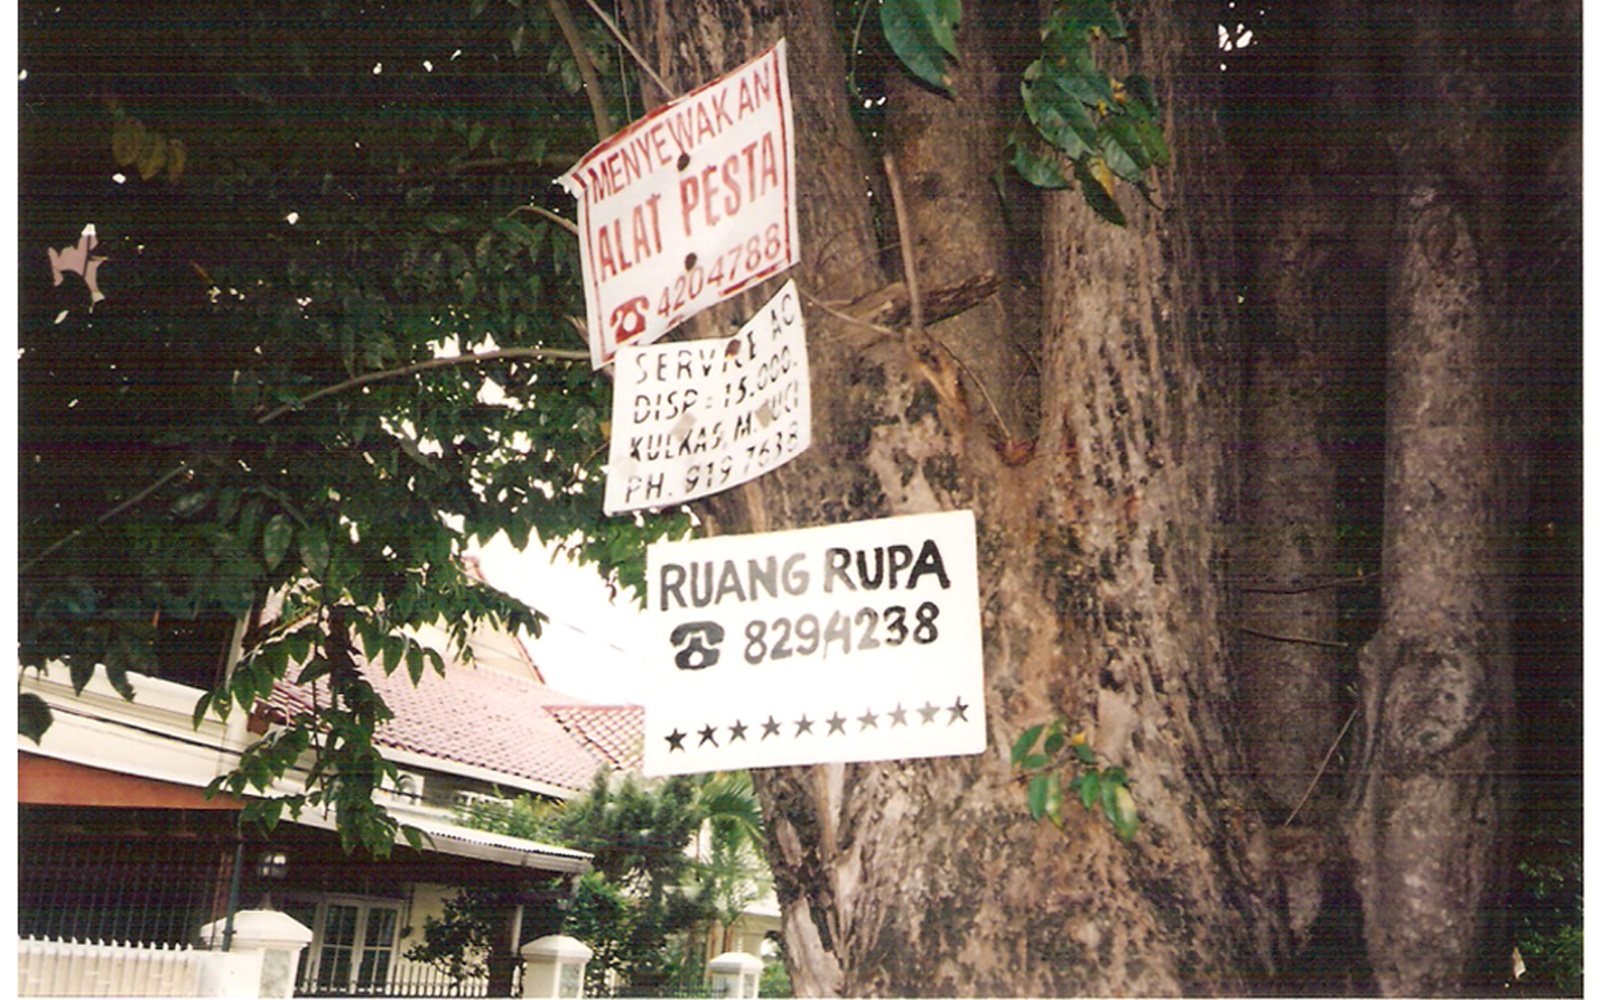 The picture shows a sign with the imprint ruangrupa hanging on a tree.